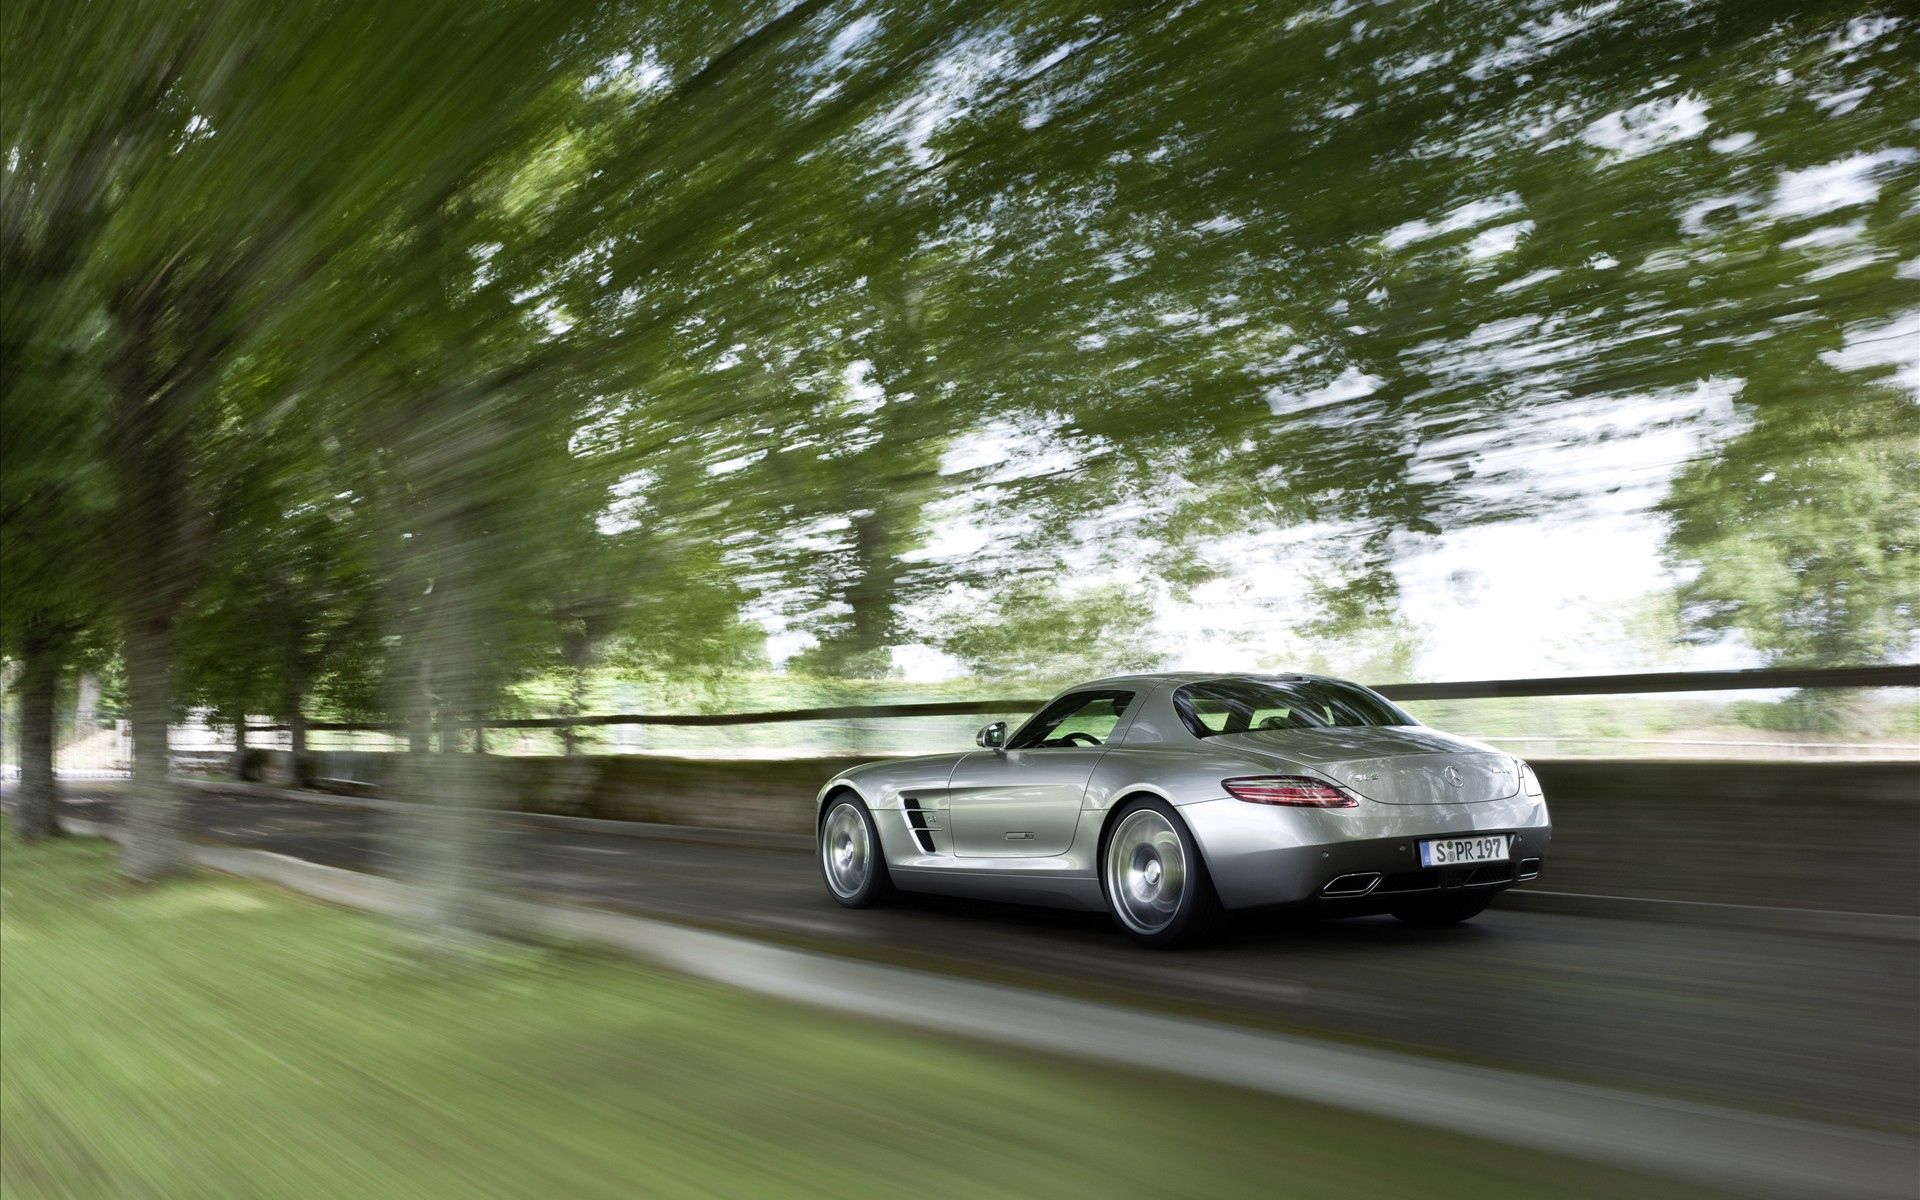 cars, amg, mersedes, speed, mercedes, blurred, fuzzy, sls, acceleration